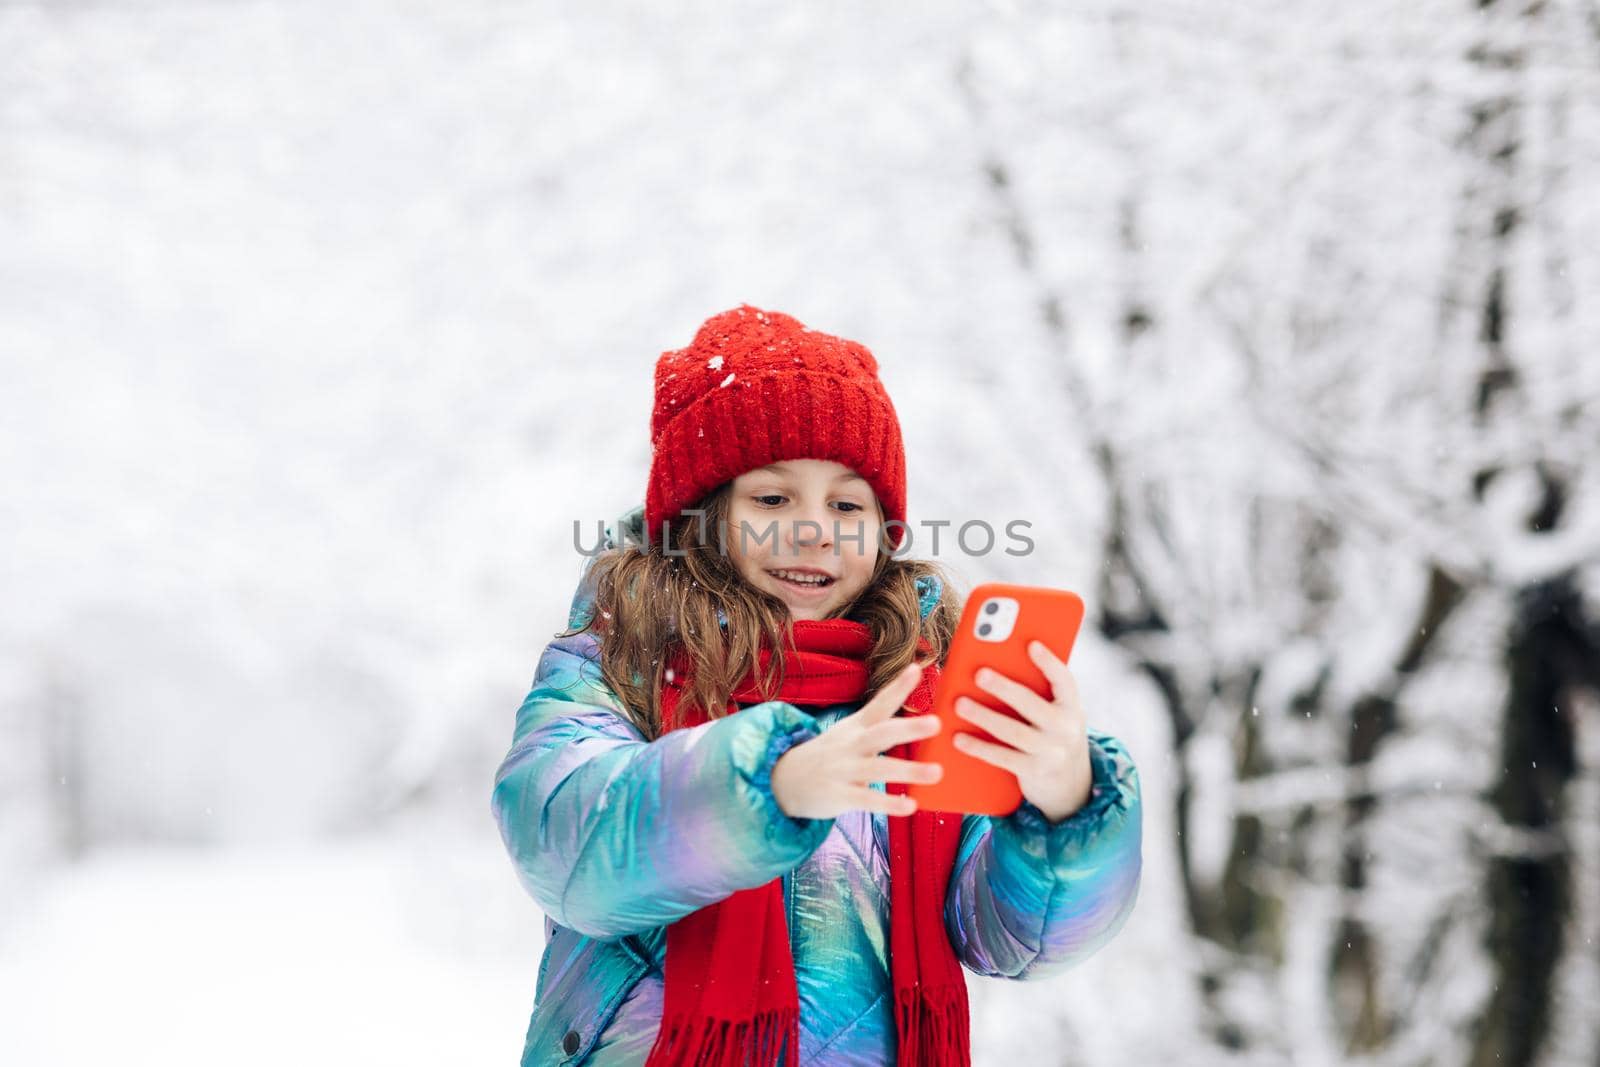 Cute little girl taking a selfie in the winter forest. Winter travel with children concept. Adorable happy smiling kid girl enjoy making selfie camera shot by smartphone.